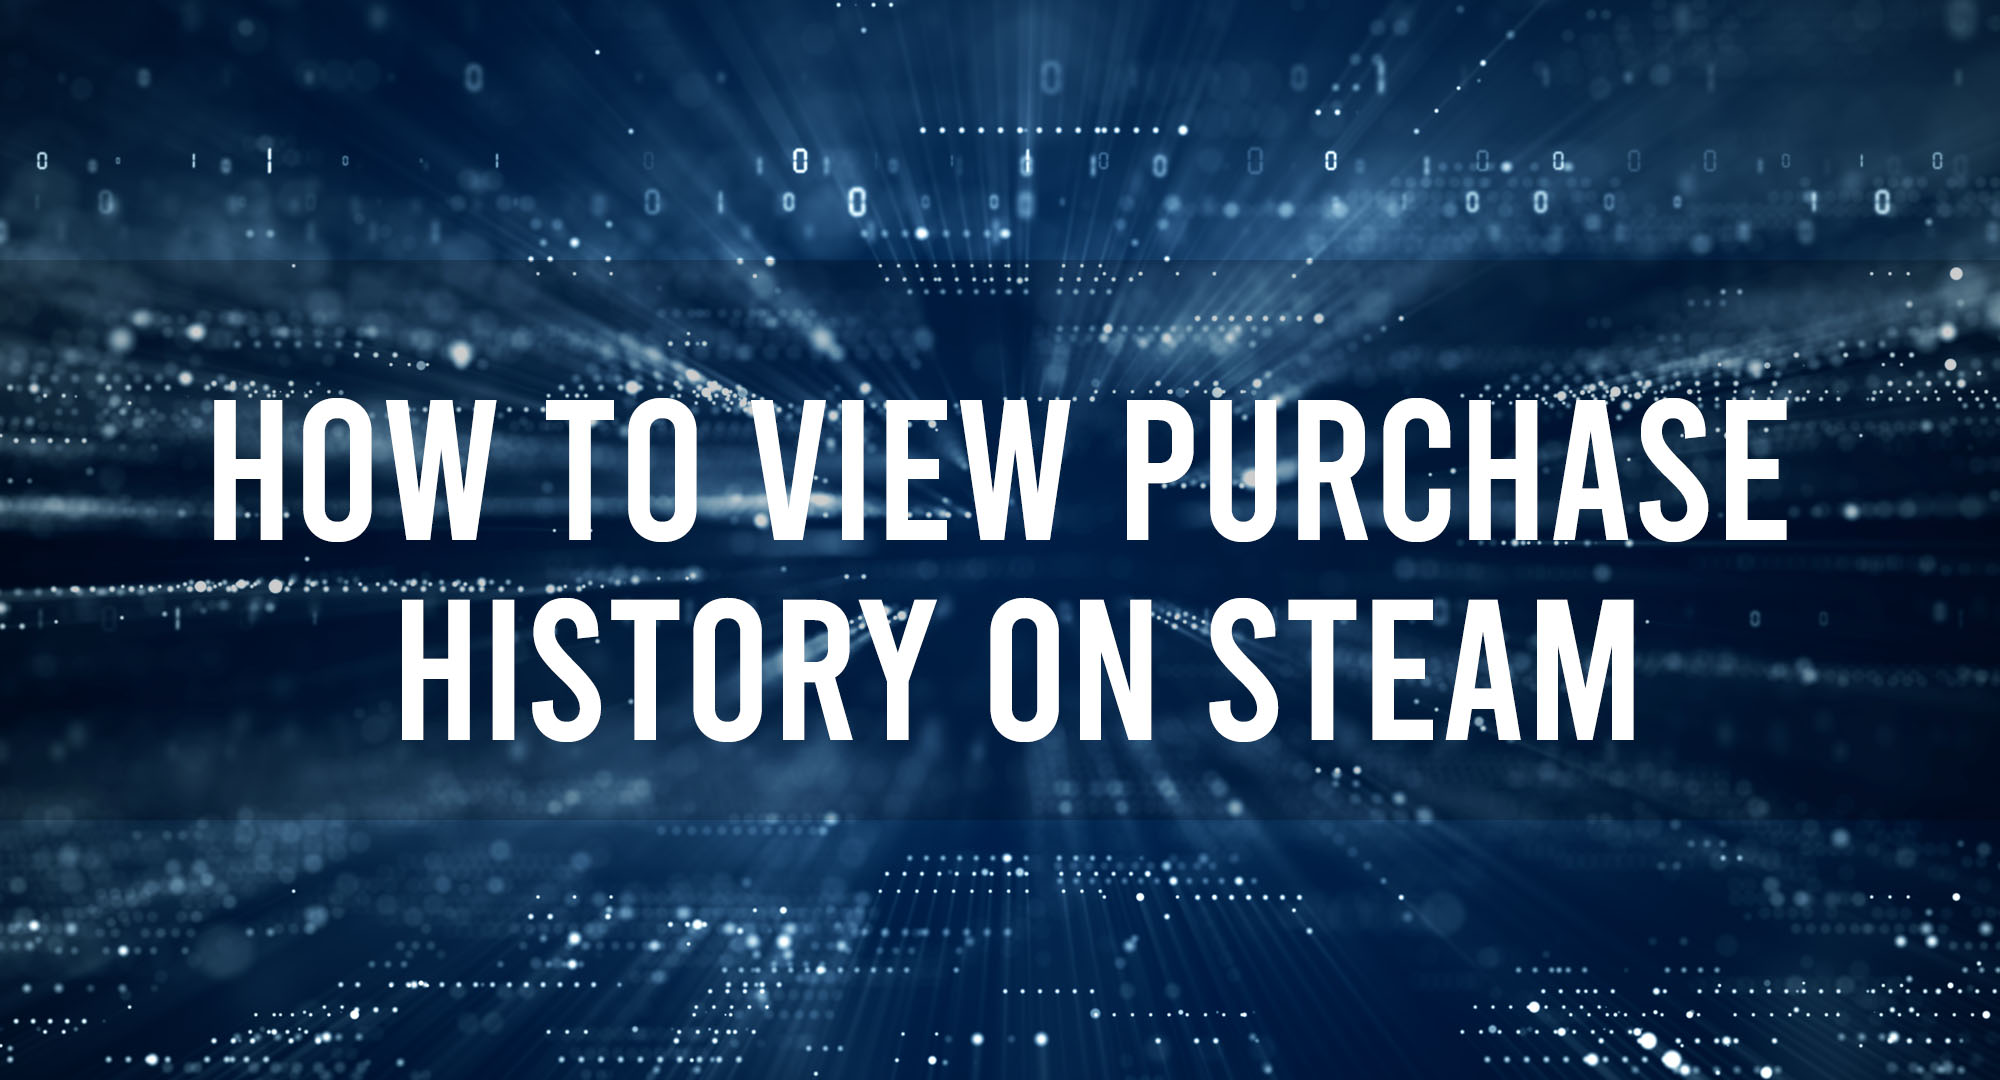 How to view purchase history on steam